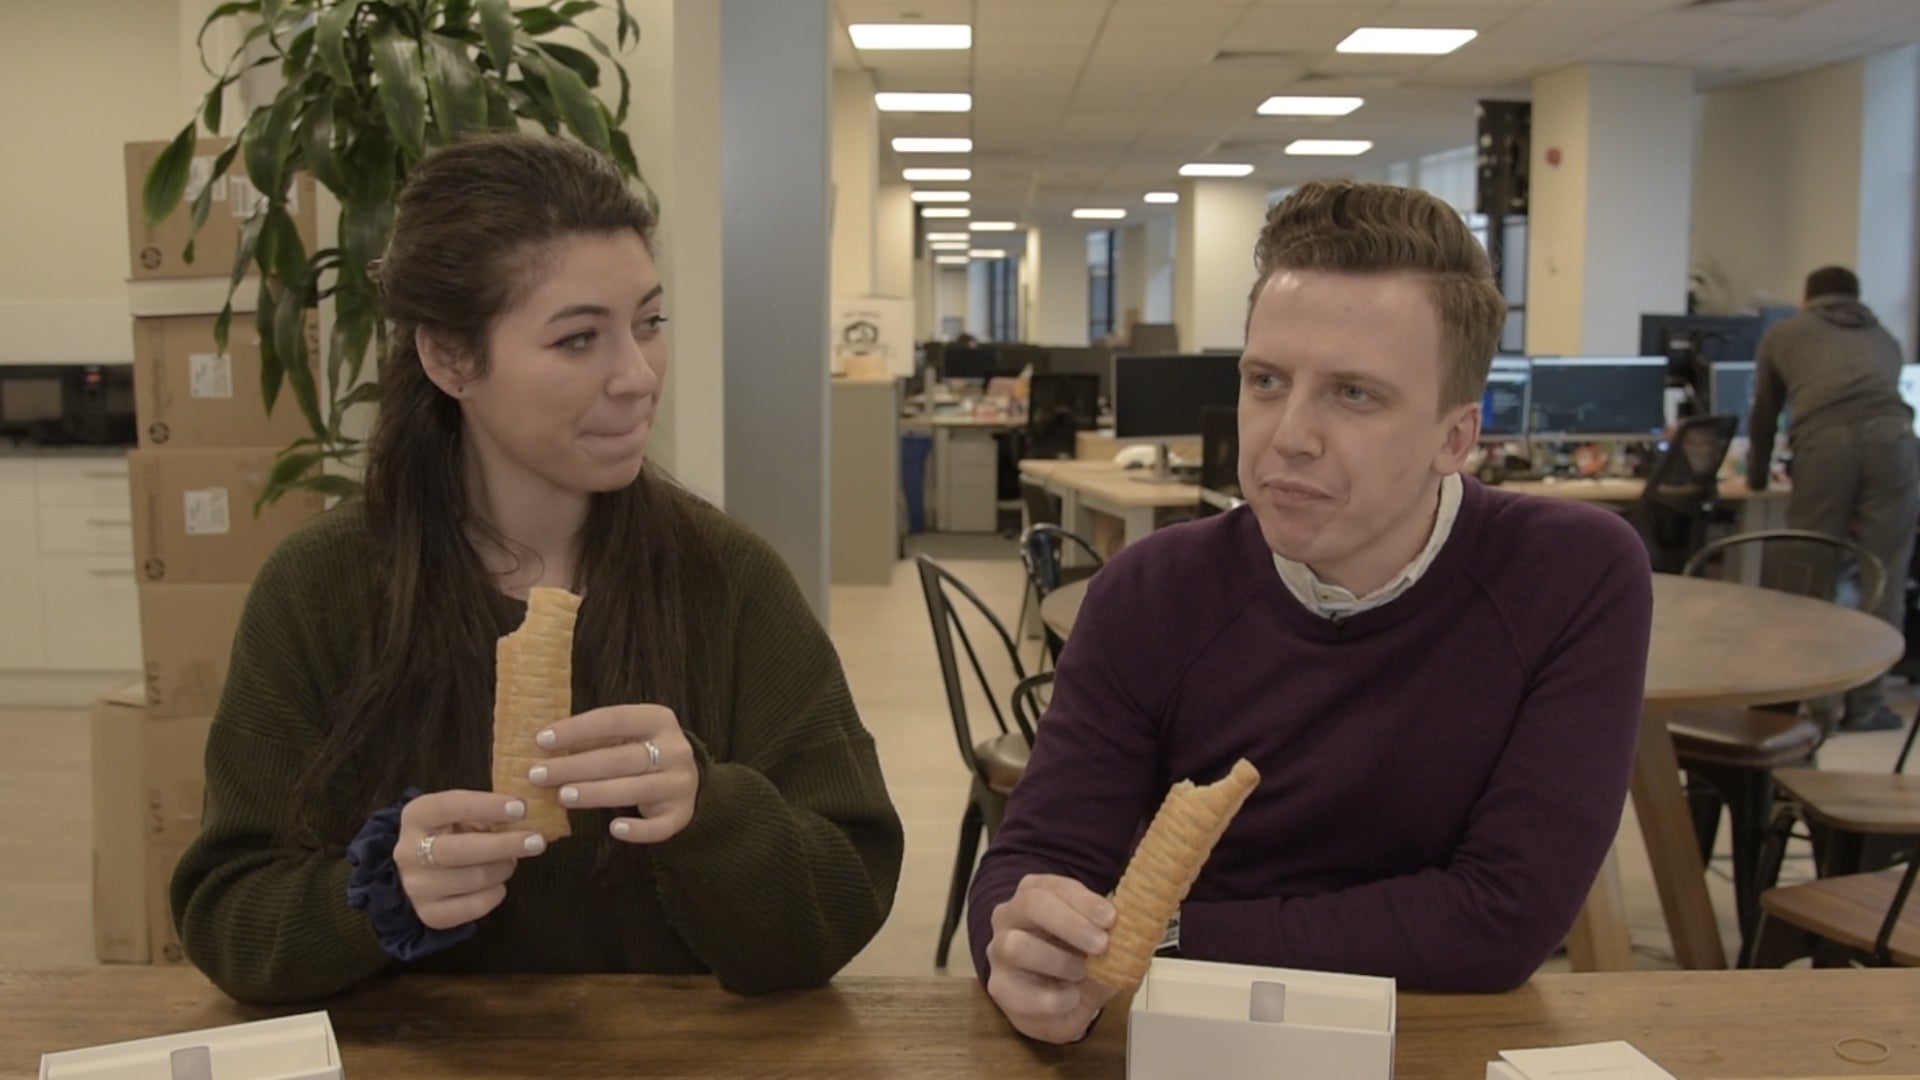 Sabrina Barr and Ben Kelly of The Independent try?Greggs’ vegan sausage rolls